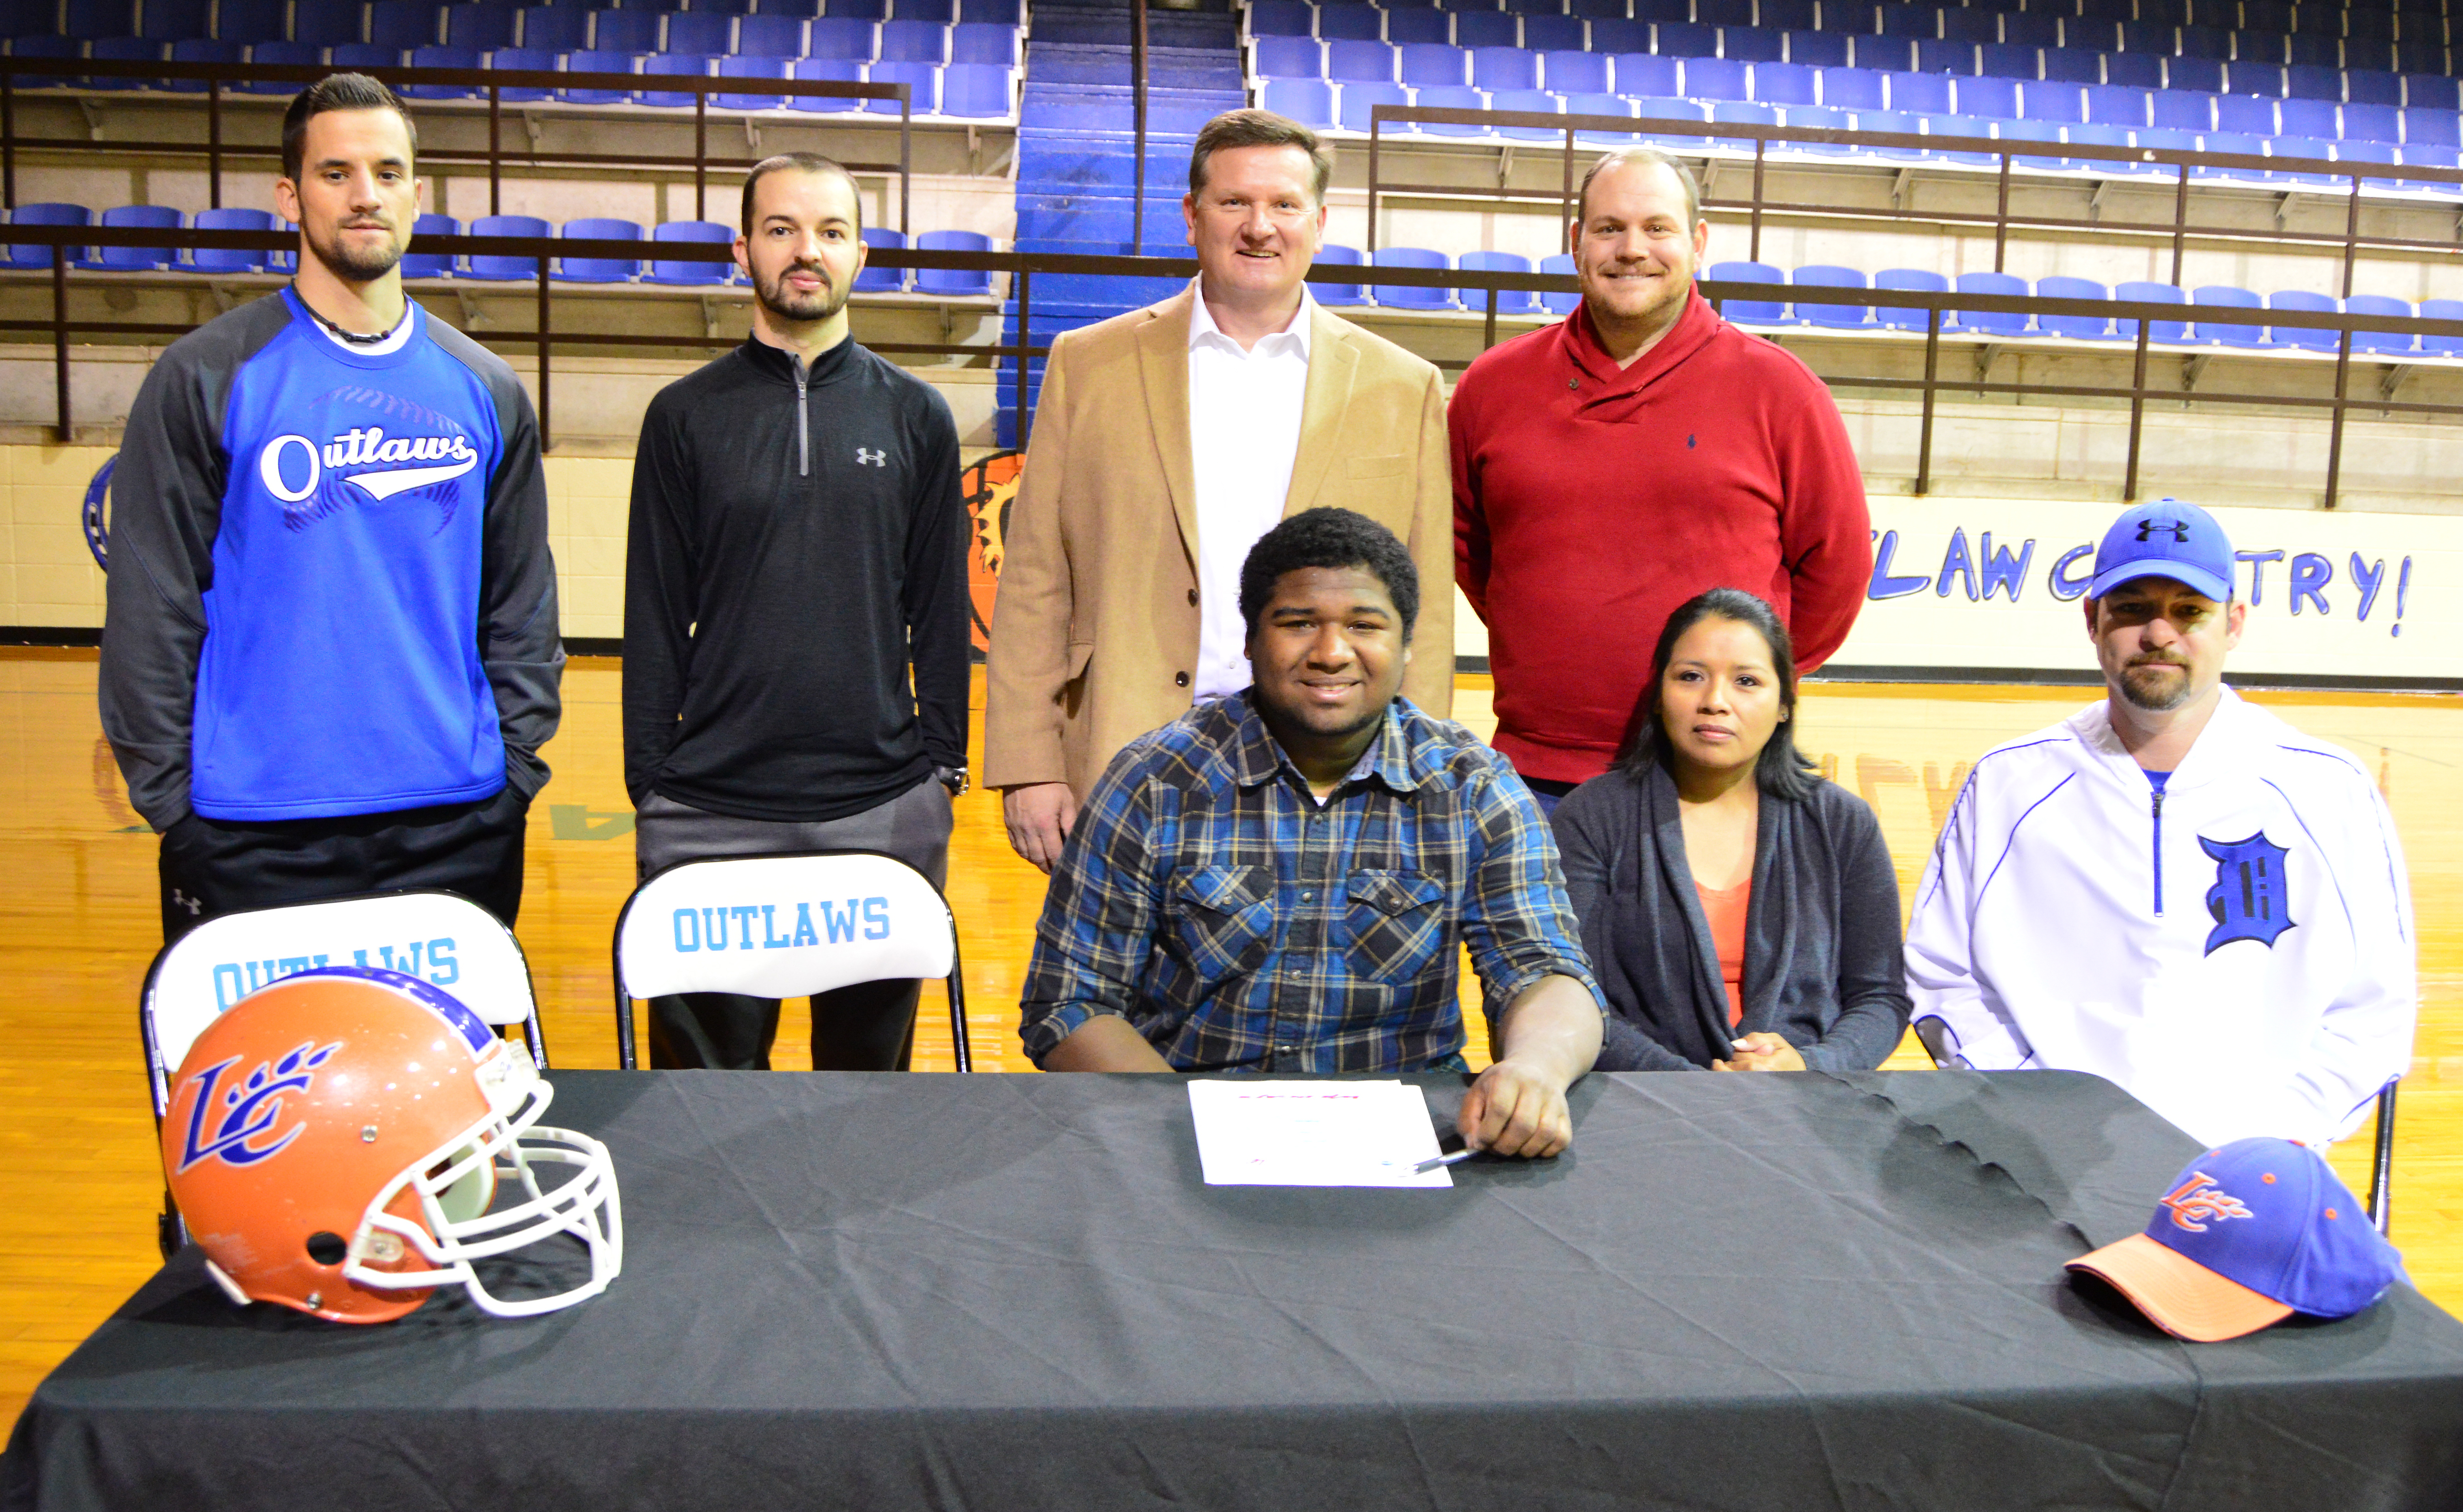 FUTURE WILDCAT. Dierks High School Outlaw tailback Trendin McKinney signed a letter of intent to play football with the Louisiana College Wildcats during a ceremony Friday morning. McKinney is pictured with his parents Kara and Matt Hill and coaches Dustin Bissell, Kevin Alexander, David Bennett and Stephen Sprick. Not pictured is coach Jeff Tipton.